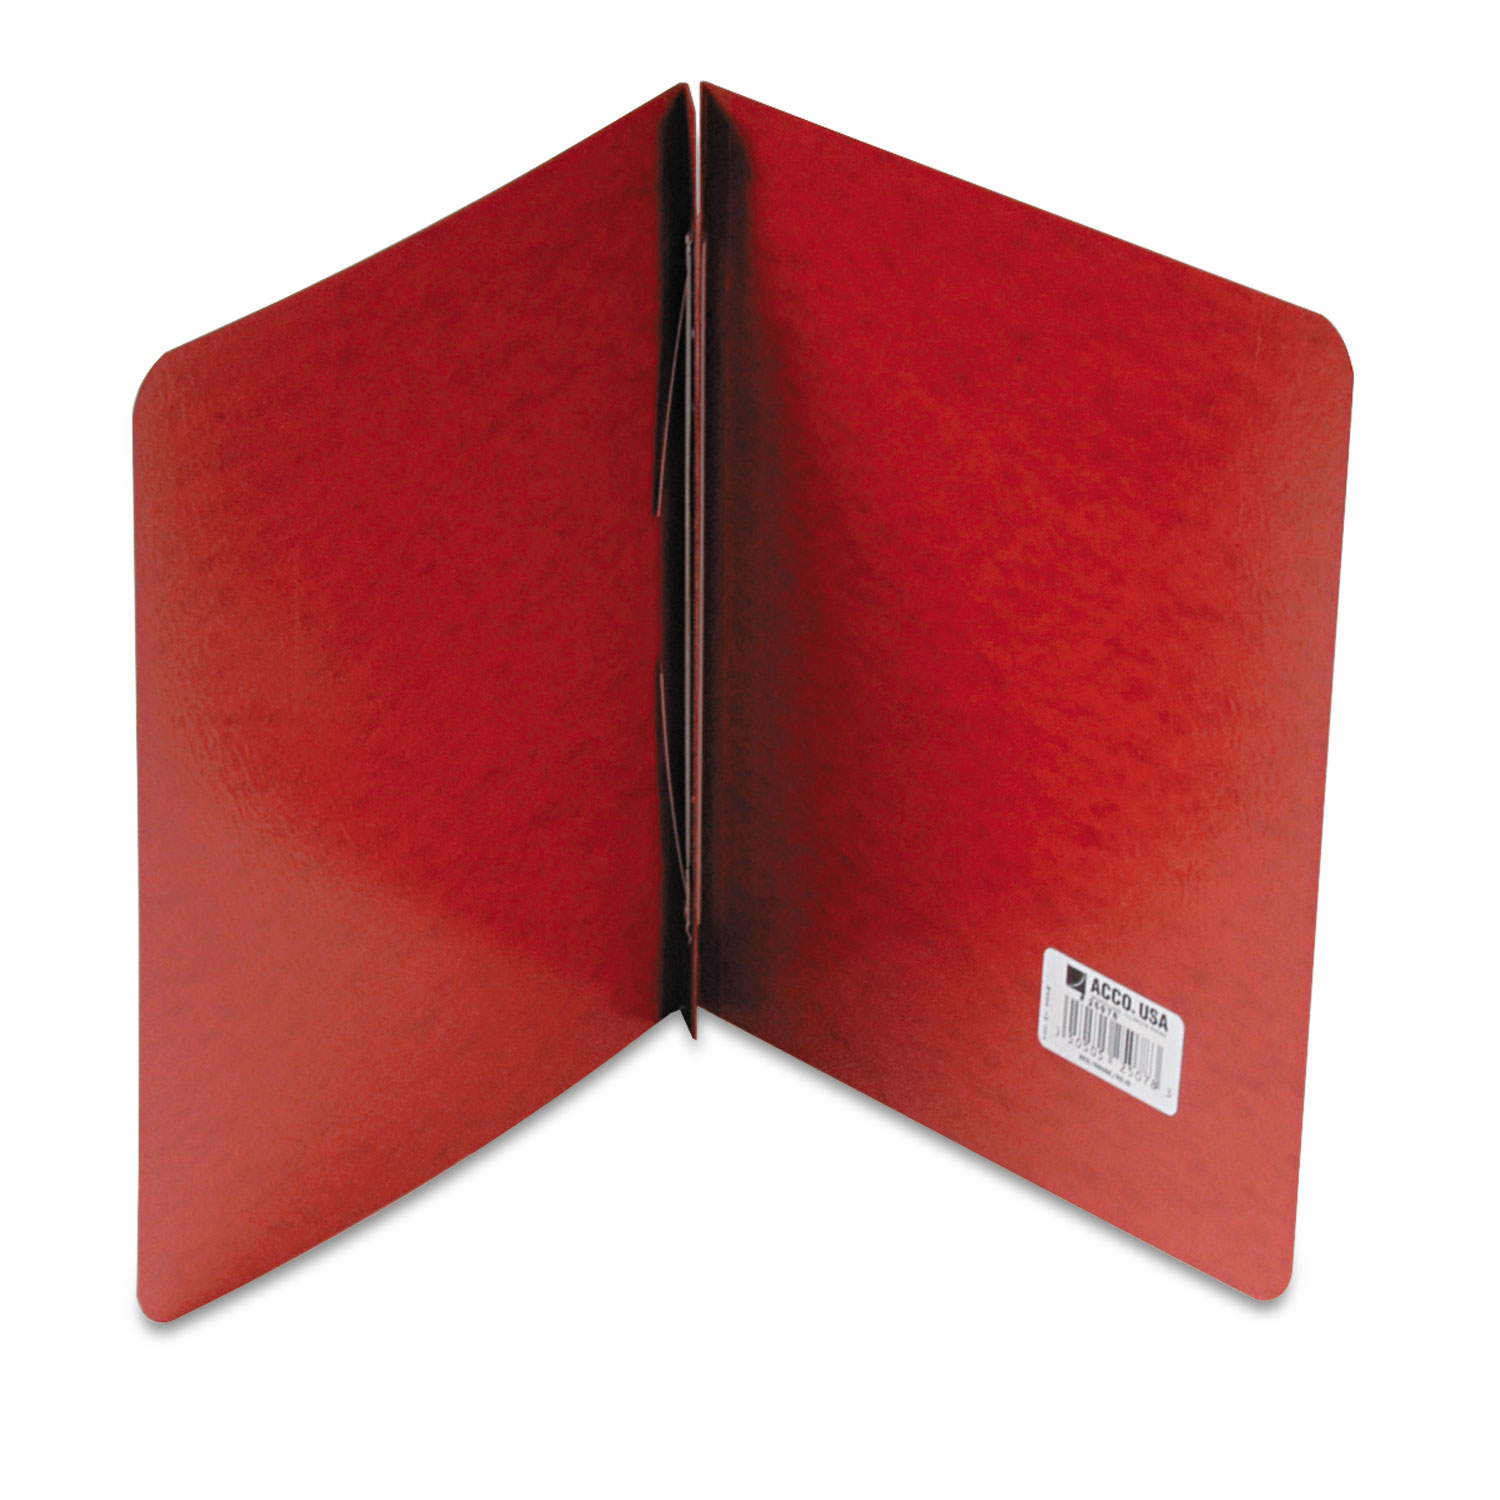 Presstex Report Cover, Side Bound, Prong Clip, Letter, 3 Cap, Red